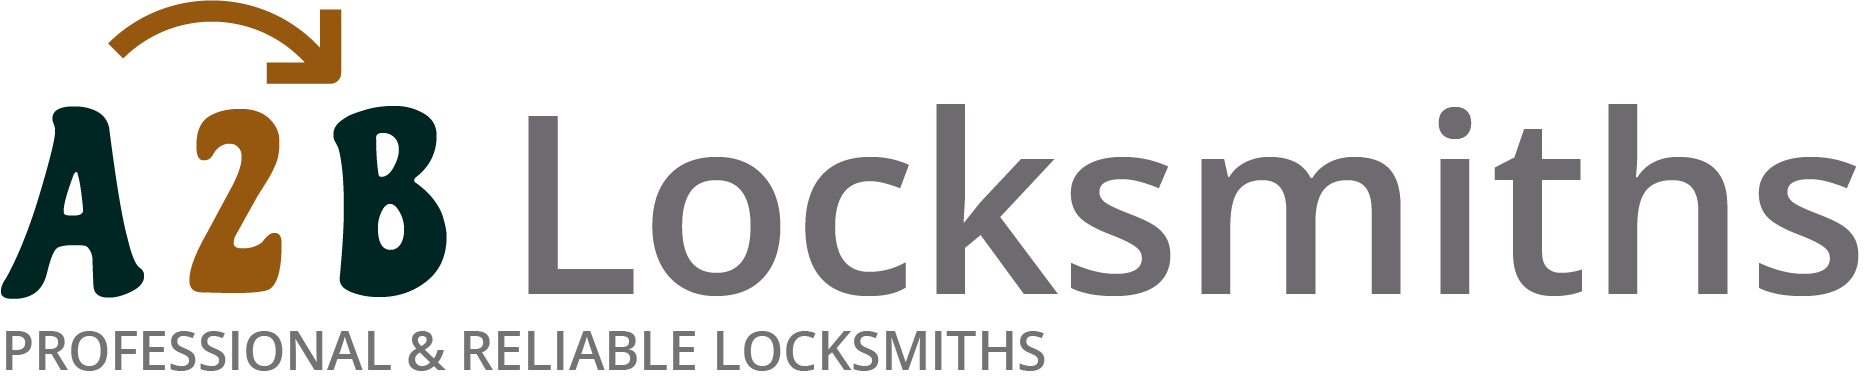 If you are locked out of house in Hemel Hempstead, our 24/7 local emergency locksmith services can help you.